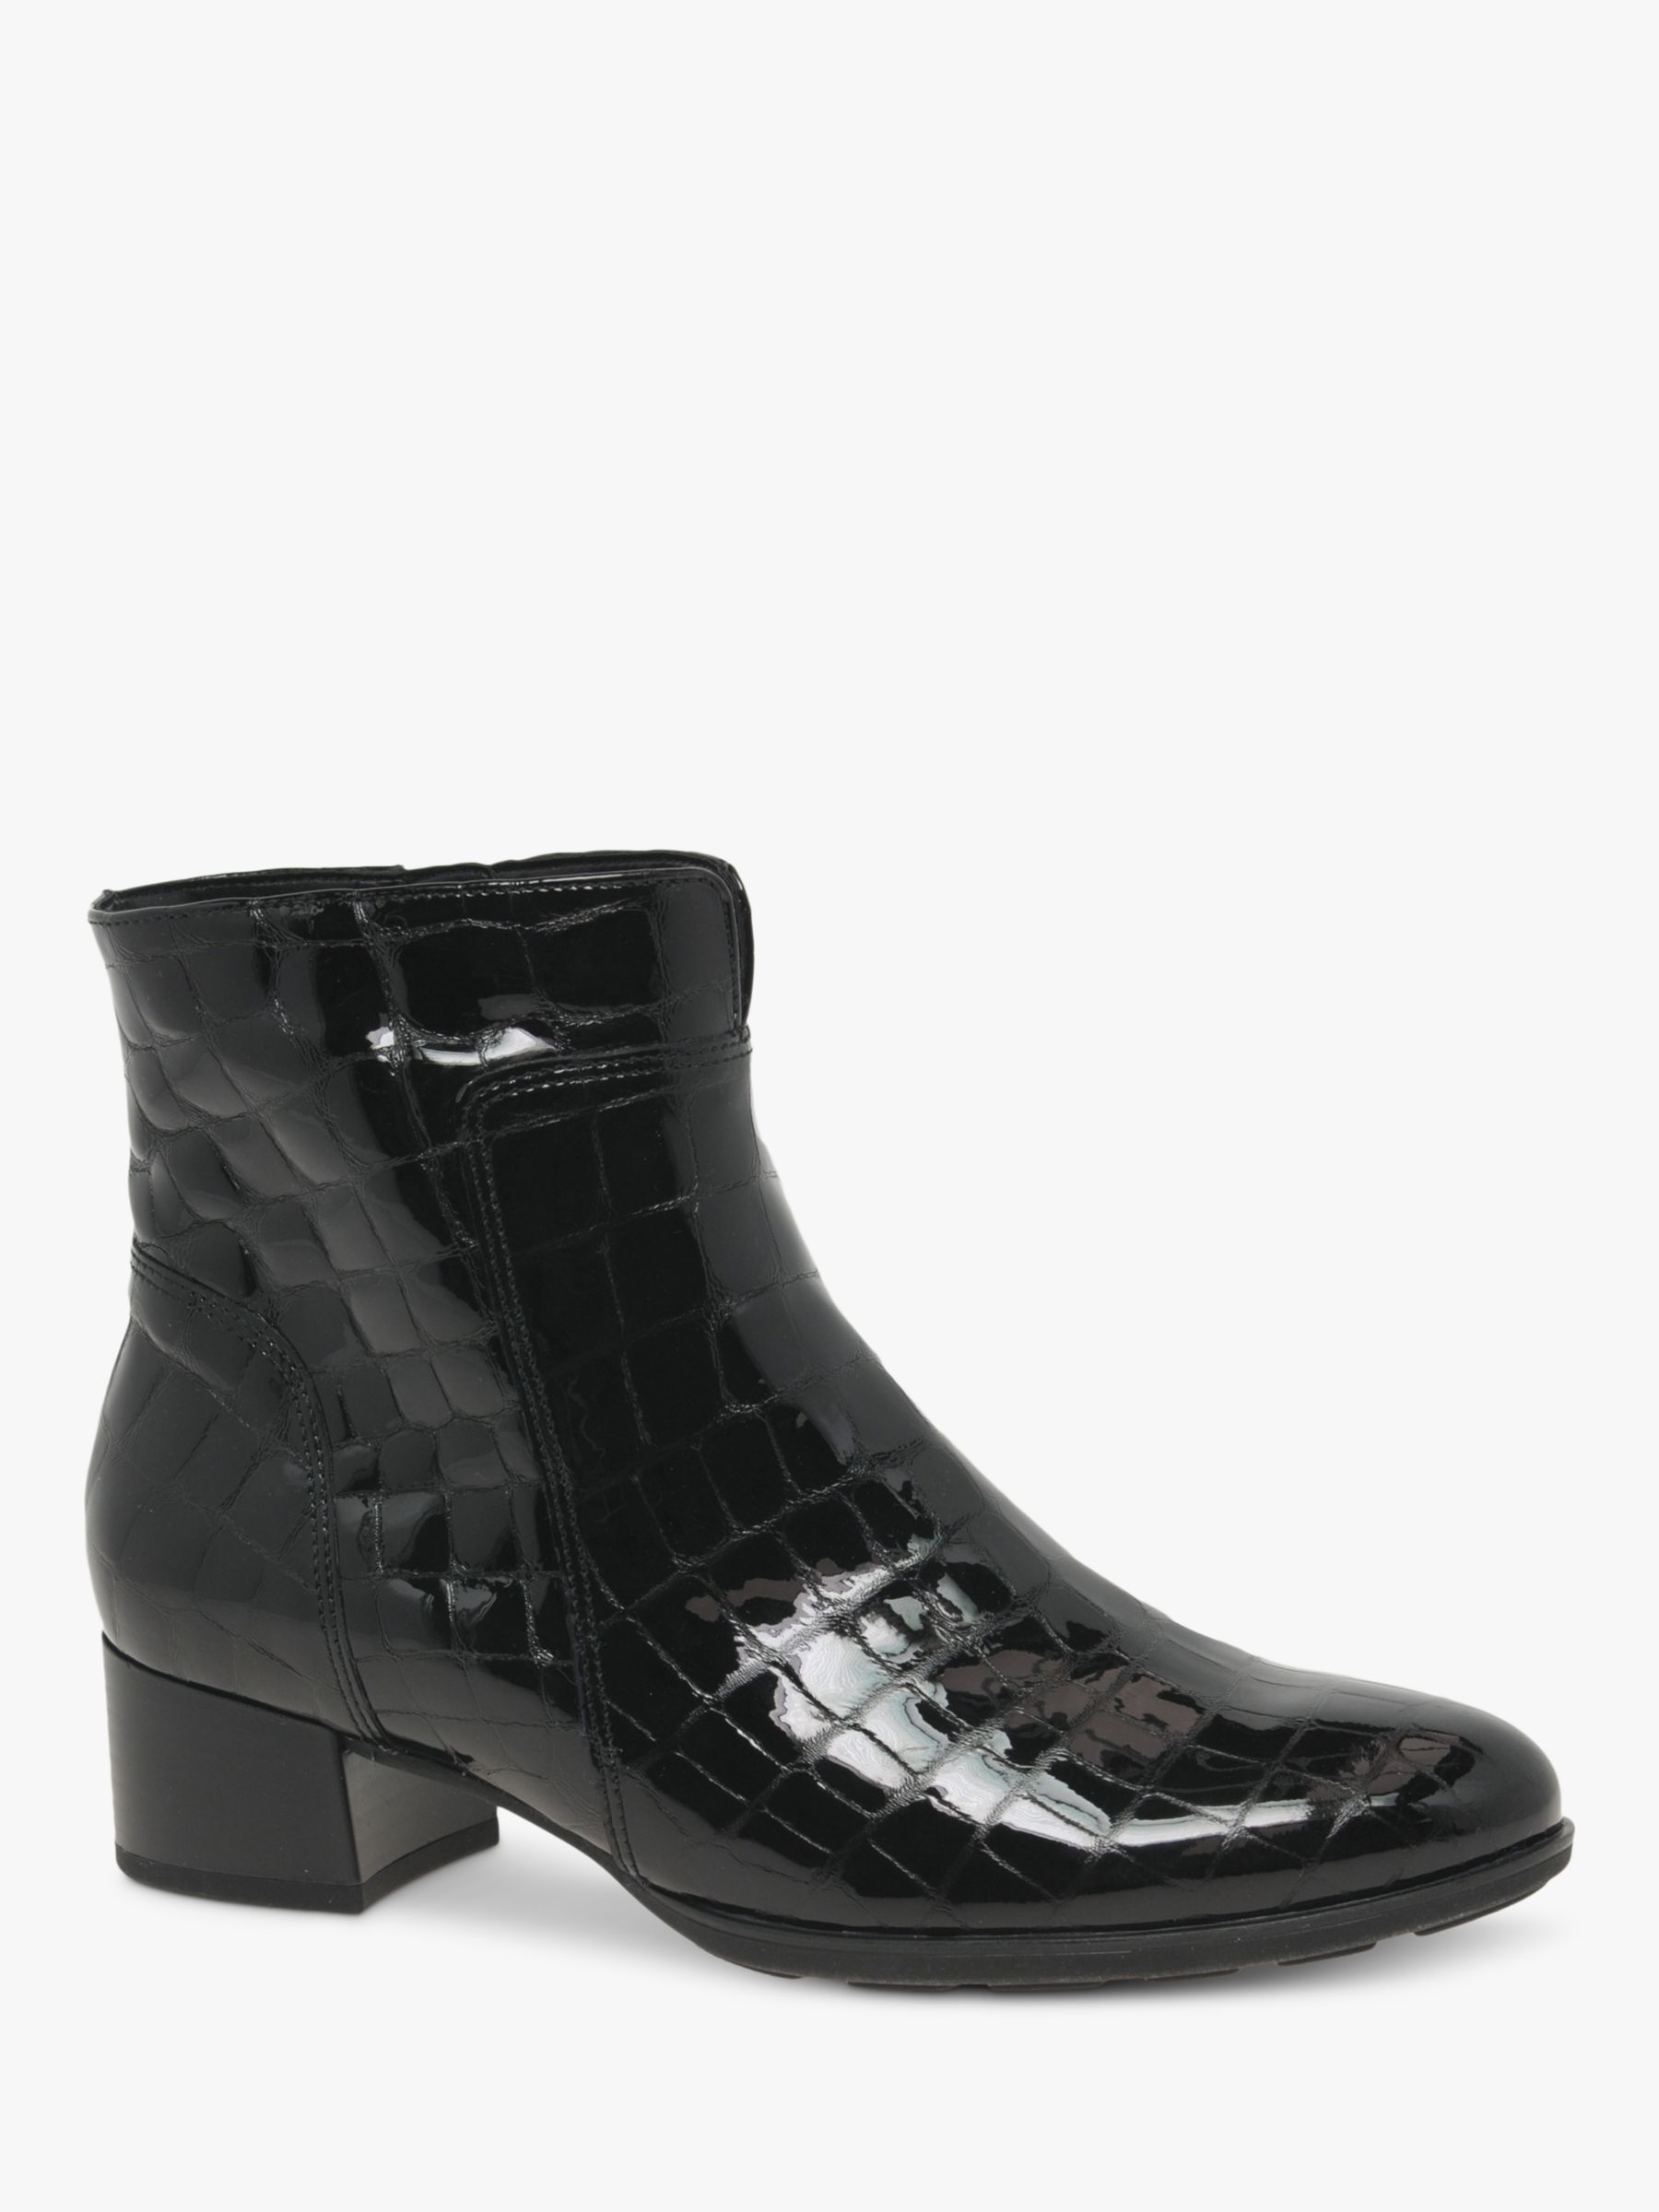 Gabor Delphino Patent Croc Leather Ankle Black at John Lewis Partners